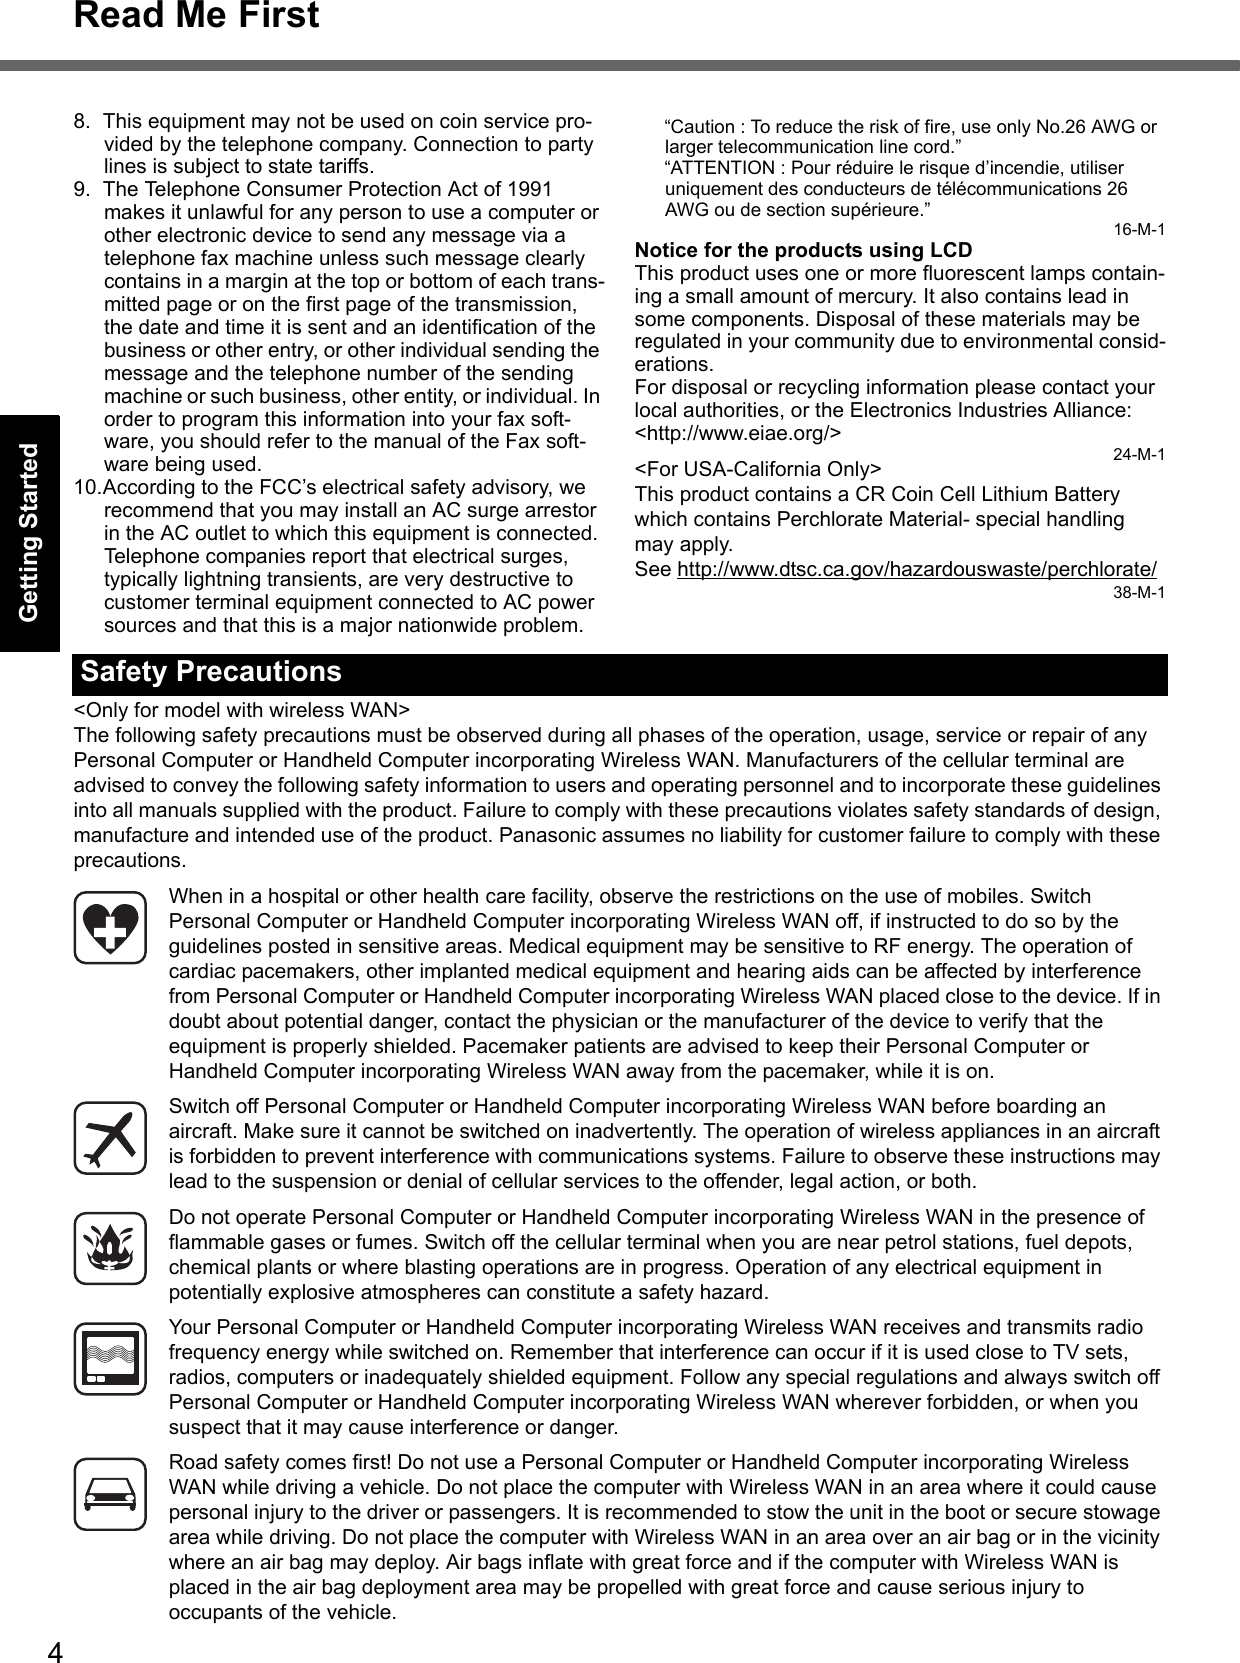 4Read Me FirstGetting StartedUseful InformationTroubleshootingAppendix8. This equipment may not be used on coin service pro-vided by the telephone company. Connection to party lines is subject to state tariffs.9. The Telephone Consumer Protection Act of 1991 makes it unlawful for any person to use a computer or other electronic device to send any message via a telephone fax machine unless such message clearly contains in a margin at the top or bottom of each trans-mitted page or on the first page of the transmission, the date and time it is sent and an identification of the business or other entry, or other individual sending the message and the telephone number of the sending machine or such business, other entity, or individual. In order to program this information into your fax soft-ware, you should refer to the manual of the Fax soft-ware being used.10.According to the FCC’s electrical safety advisory, we recommend that you may install an AC surge arrestor in the AC outlet to which this equipment is connected. Telephone companies report that electrical surges, typically lightning transients, are very destructive to customer terminal equipment connected to AC power sources and that this is a major nationwide problem.“Caution : To reduce the risk of fire, use only No.26 AWG or larger telecommunication line cord.”“ATTENTION : Pour réduire le risque d’incendie, utiliser uniquement des conducteurs de télécommunications 26 AWG ou de section supérieure.”16-M-1Notice for the products using LCDThis product uses one or more fluorescent lamps contain-ing a small amount of mercury. It also contains lead in some components. Disposal of these materials may be regulated in your community due to environmental consid-erations. For disposal or recycling information please contact your local authorities, or the Electronics Industries Alliance: &lt;http://www.eiae.org/&gt;24-M-1&lt;For USA-California Only&gt;This product contains a CR Coin Cell Lithium Battery which contains Perchlorate Material- special handling may apply.See http://www.dtsc.ca.gov/hazardouswaste/perchlorate/38-M-1&lt;Only for model with wireless WAN&gt;The following safety precautions must be observed during all phases of the operation, usage, service or repair of any Personal Computer or Handheld Computer incorporating Wireless WAN. Manufacturers of the cellular terminal are advised to convey the following safety information to users and operating personnel and to incorporate these guidelines into all manuals supplied with the product. Failure to comply with these precautions violates safety standards of design, manufacture and intended use of the product. Panasonic assumes no liability for customer failure to comply with these precautions.When in a hospital or other health care facility, observe the restrictions on the use of mobiles. Switch Personal Computer or Handheld Computer incorporating Wireless WAN off, if instructed to do so by the guidelines posted in sensitive areas. Medical equipment may be sensitive to RF energy. The operation of cardiac pacemakers, other implanted medical equipment and hearing aids can be affected by interference from Personal Computer or Handheld Computer incorporating Wireless WAN placed close to the device. If in doubt about potential danger, contact the physician or the manufacturer of the device to verify that the equipment is properly shielded. Pacemaker patients are advised to keep their Personal Computer or Handheld Computer incorporating Wireless WAN away from the pacemaker, while it is on.Switch off Personal Computer or Handheld Computer incorporating Wireless WAN before boarding an aircraft. Make sure it cannot be switched on inadvertently. The operation of wireless appliances in an aircraft is forbidden to prevent interference with communications systems. Failure to observe these instructions may lead to the suspension or denial of cellular services to the offender, legal action, or both.Do not operate Personal Computer or Handheld Computer incorporating Wireless WAN in the presence of flammable gases or fumes. Switch off the cellular terminal when you are near petrol stations, fuel depots, chemical plants or where blasting operations are in progress. Operation of any electrical equipment in potentially explosive atmospheres can constitute a safety hazard.Your Personal Computer or Handheld Computer incorporating Wireless WAN receives and transmits radio frequency energy while switched on. Remember that interference can occur if it is used close to TV sets, radios, computers or inadequately shielded equipment. Follow any special regulations and always switch off Personal Computer or Handheld Computer incorporating Wireless WAN wherever forbidden, or when you suspect that it may cause interference or danger.Road safety comes first! Do not use a Personal Computer or Handheld Computer incorporating Wireless WAN while driving a vehicle. Do not place the computer with Wireless WAN in an area where it could cause personal injury to the driver or passengers. It is recommended to stow the unit in the boot or secure stowage area while driving. Do not place the computer with Wireless WAN in an area over an air bag or in the vicinity where an air bag may deploy. Air bags inflate with great force and if the computer with Wireless WAN is placed in the air bag deployment area may be propelled with great force and cause serious injury to occupants of the vehicle.Safety Precautions